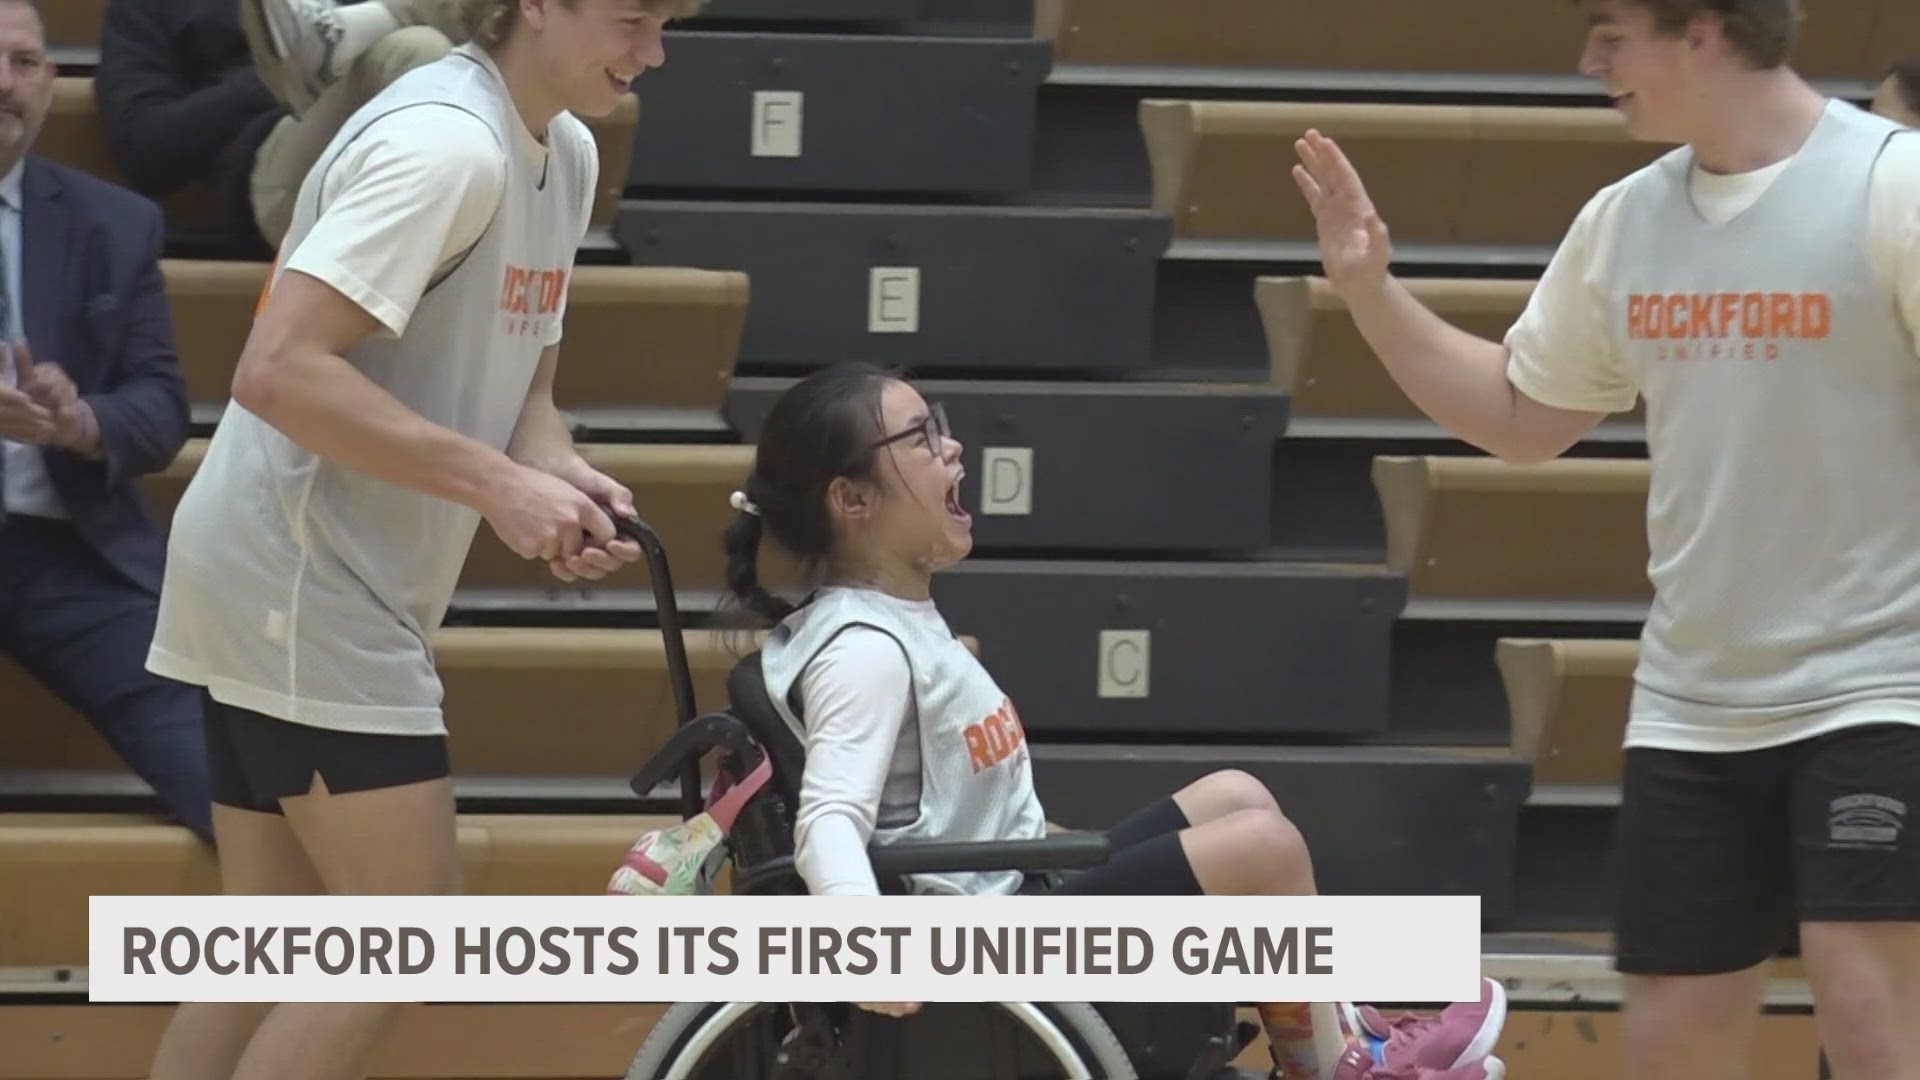 Rockford vs. Grandville is one of the biggest high school sports rivalries in the state, but in a game Tuesday night, it was all love between the Rams and Bulldogs.